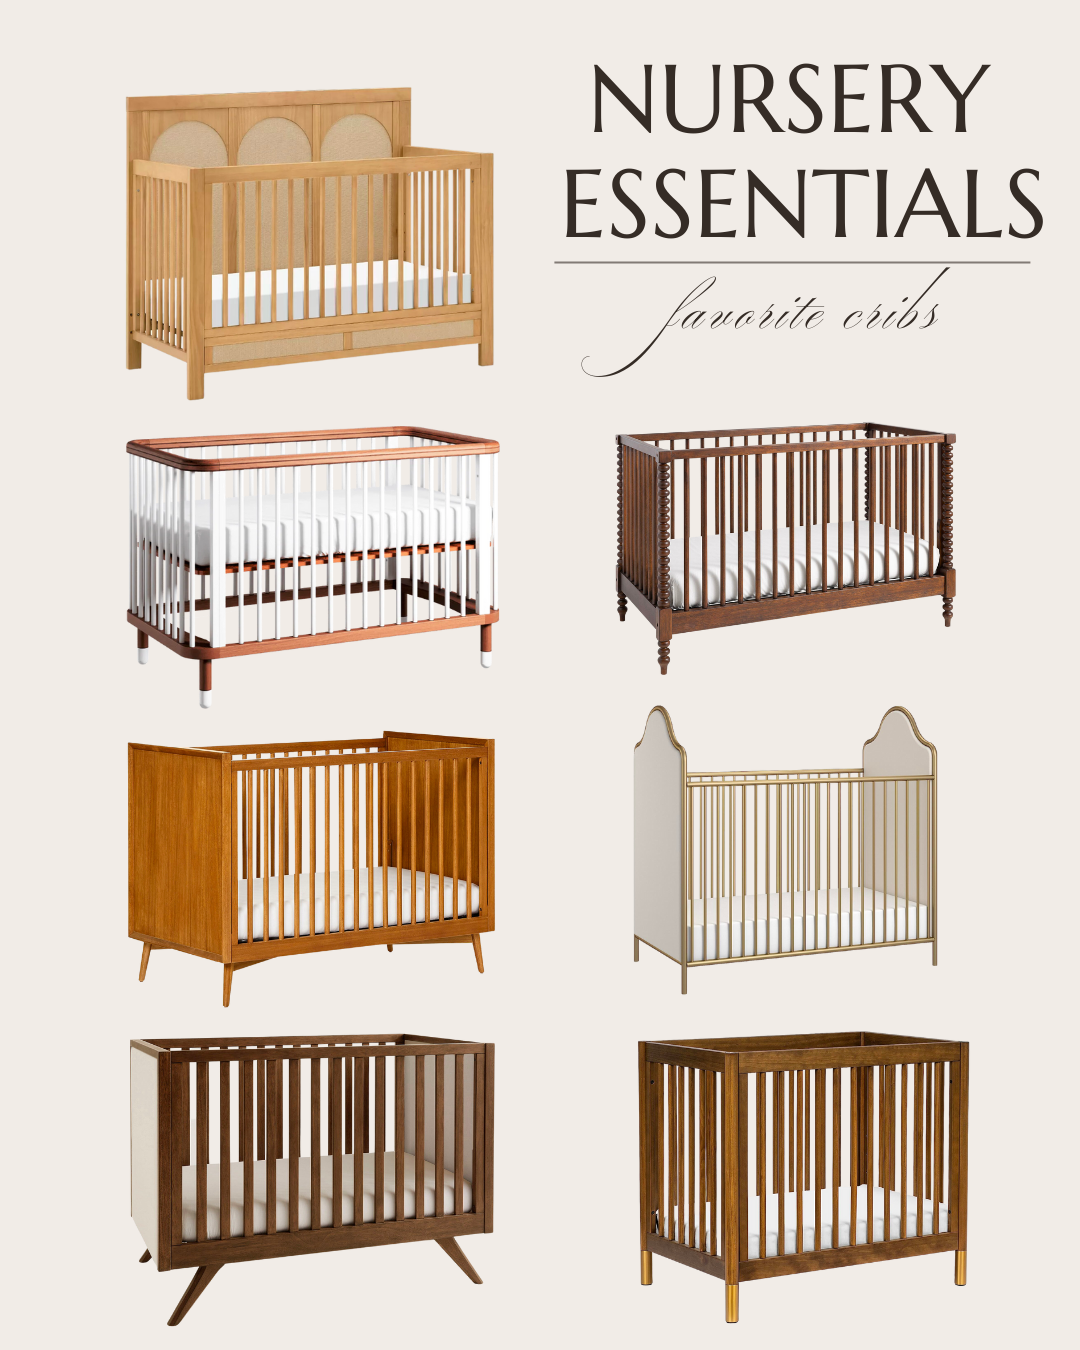 Nursery Essentials for First Time Moms